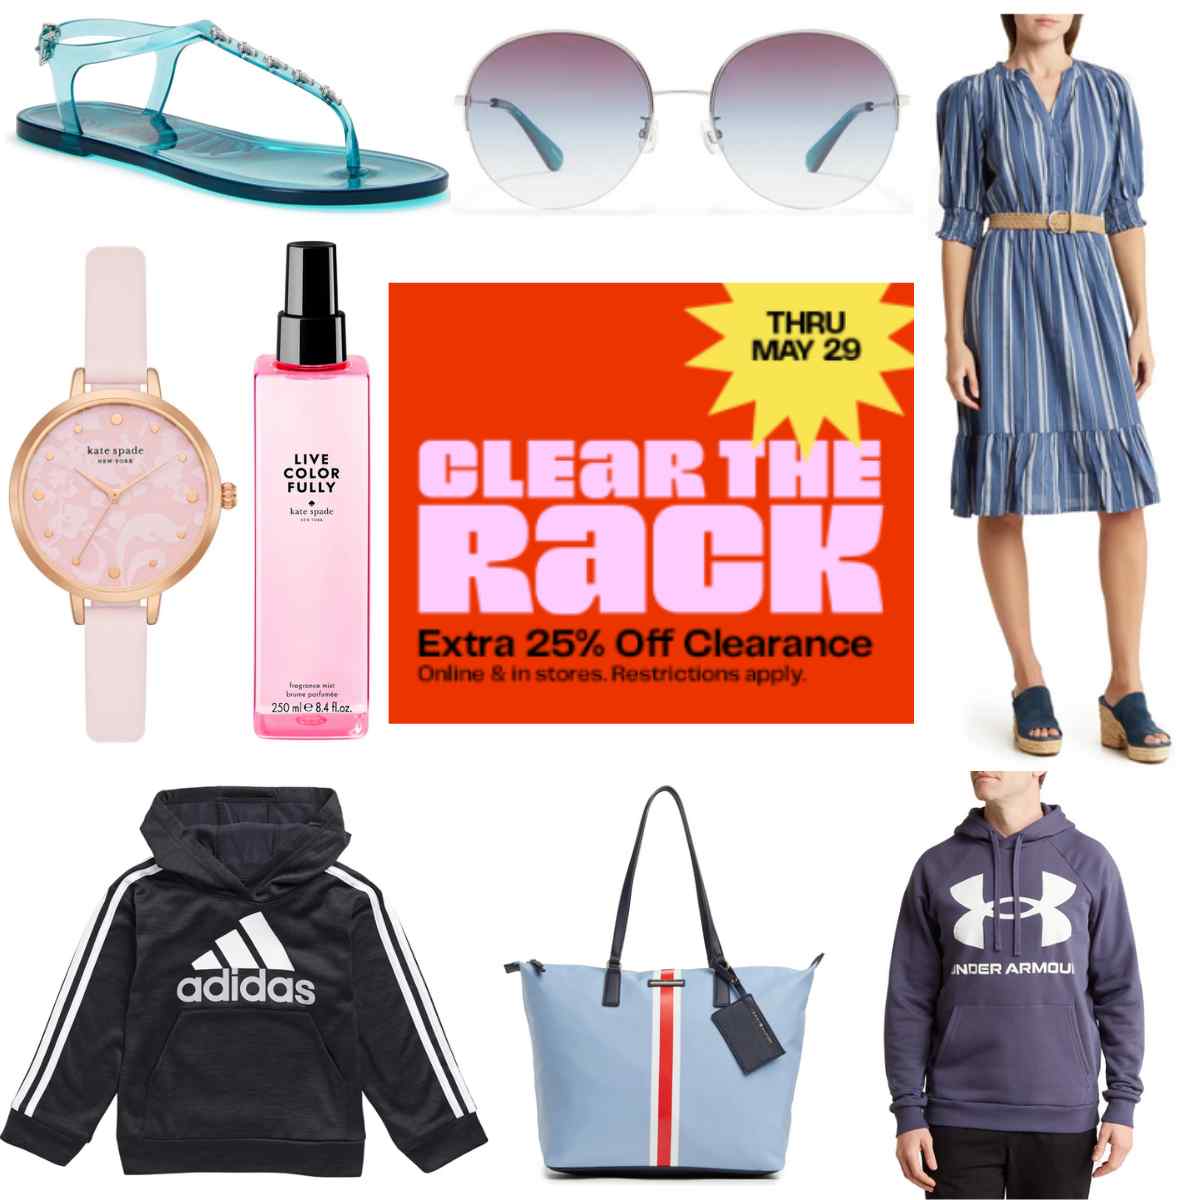 Nordstrom Rack's Best Travel Gifts Are on Sale